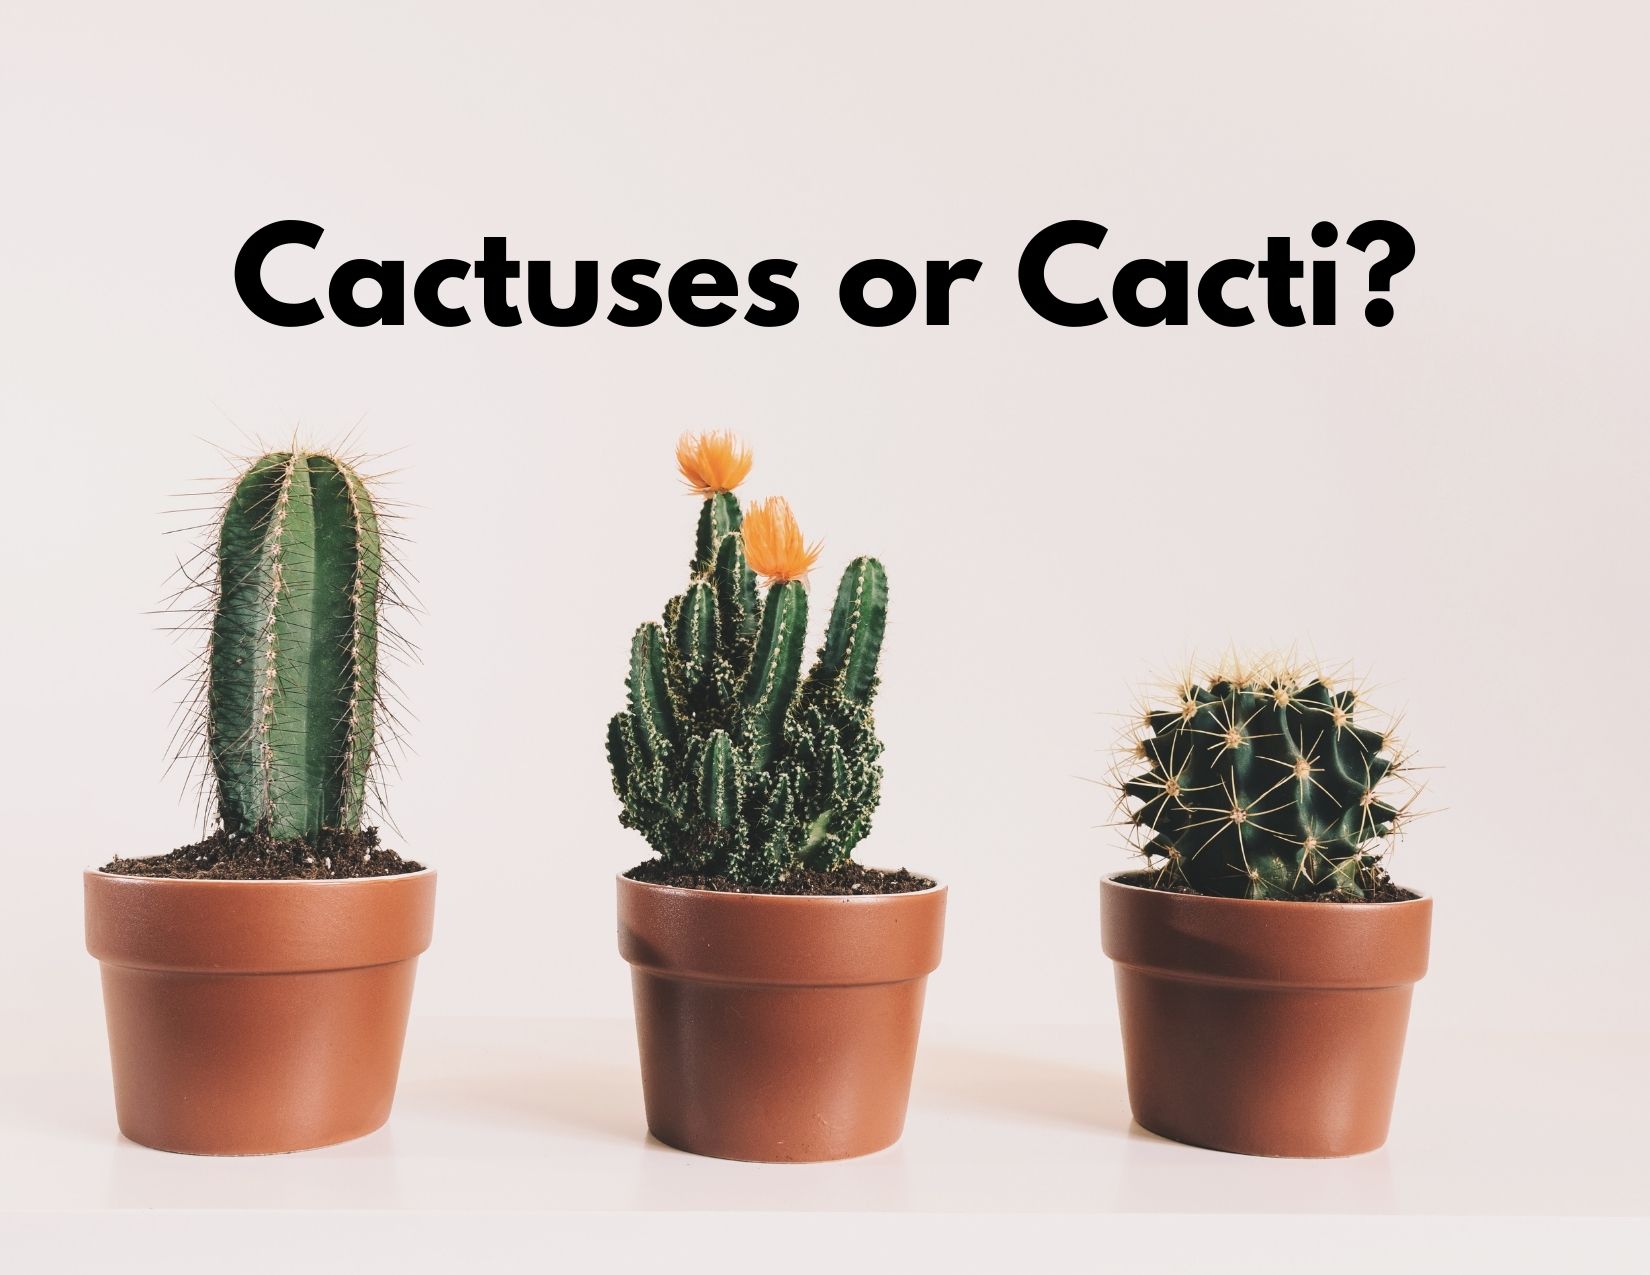 A picture of three cactus plants with the words "Cactuses or Cacti?"